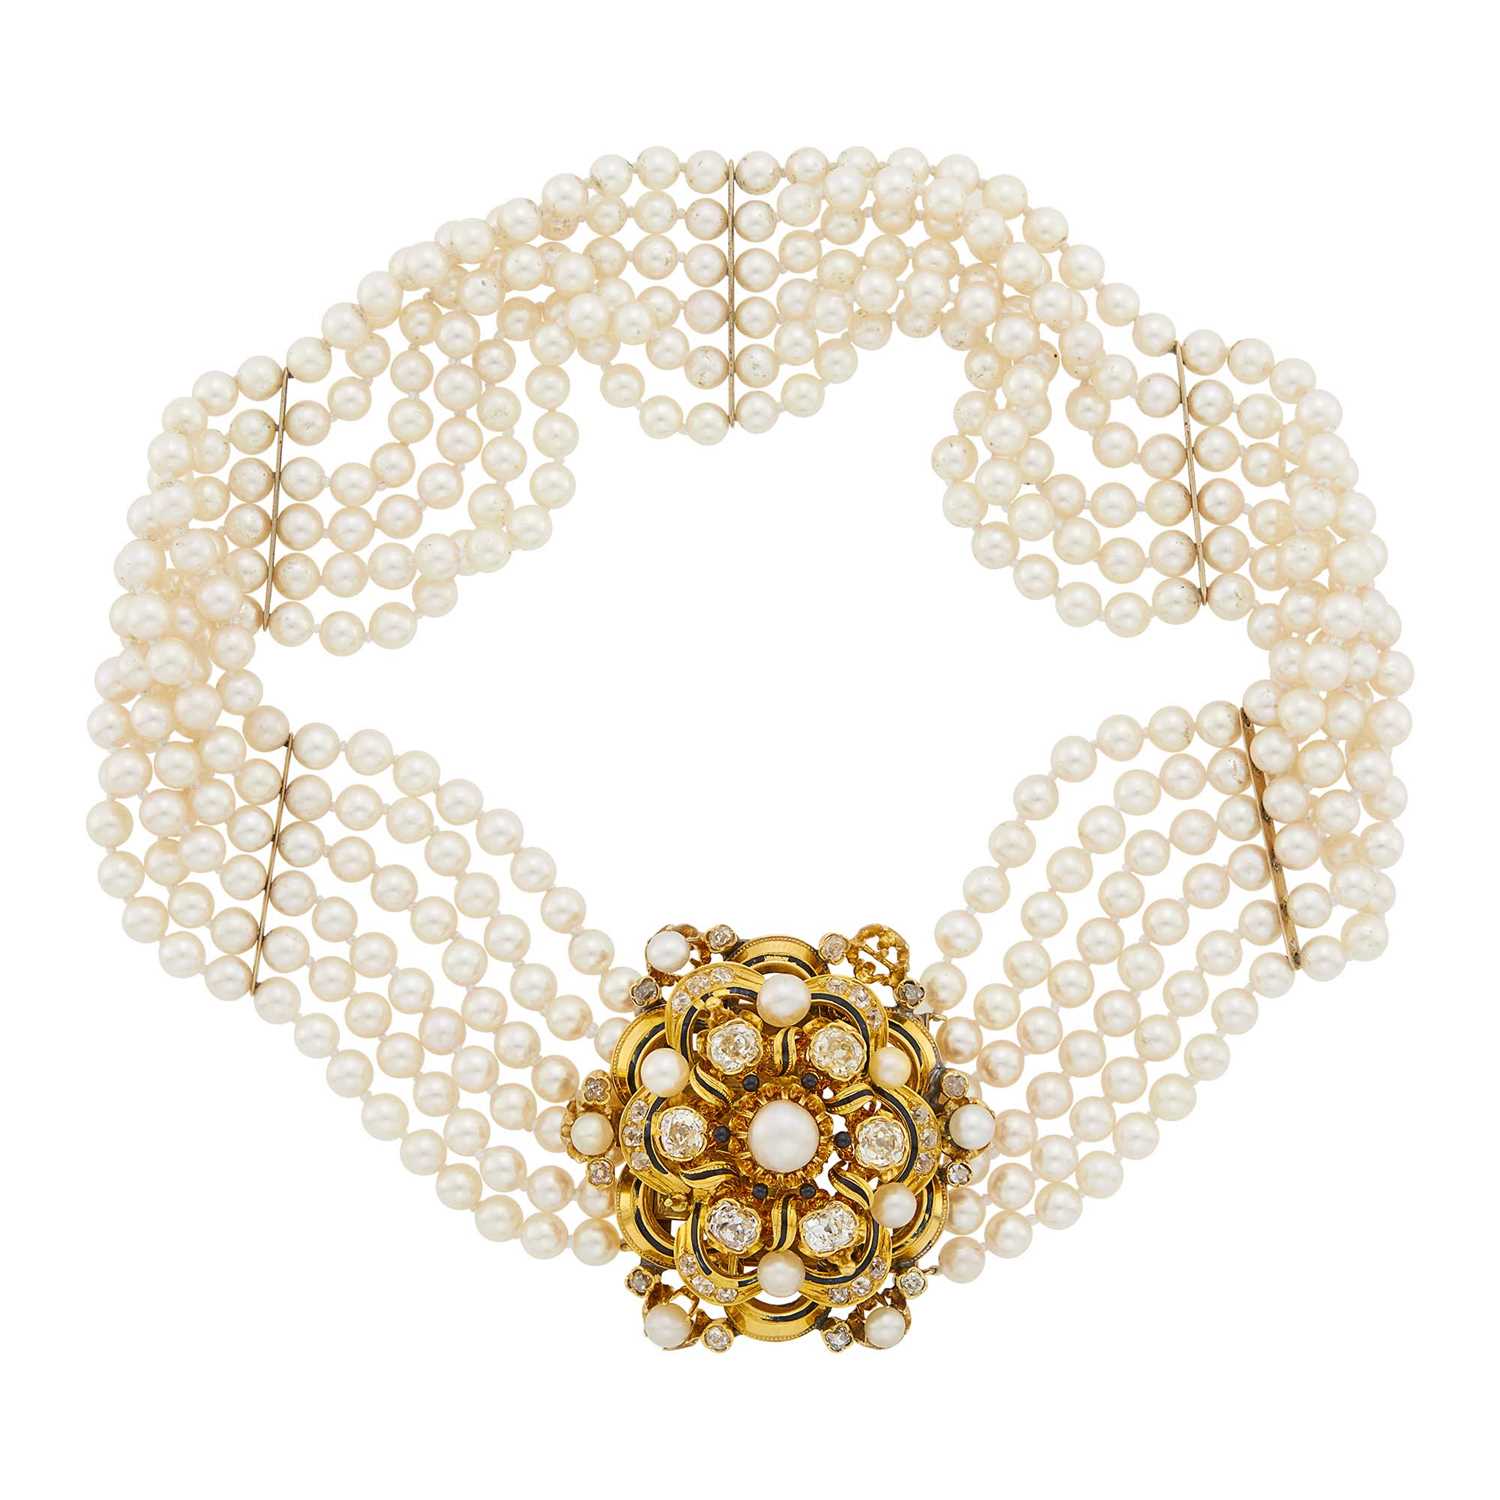 Lot 1072 - Six Strand Cultured Pearl Choker Necklace with Antique Gold, Diamond, Pearl and Black Enamel Clasp